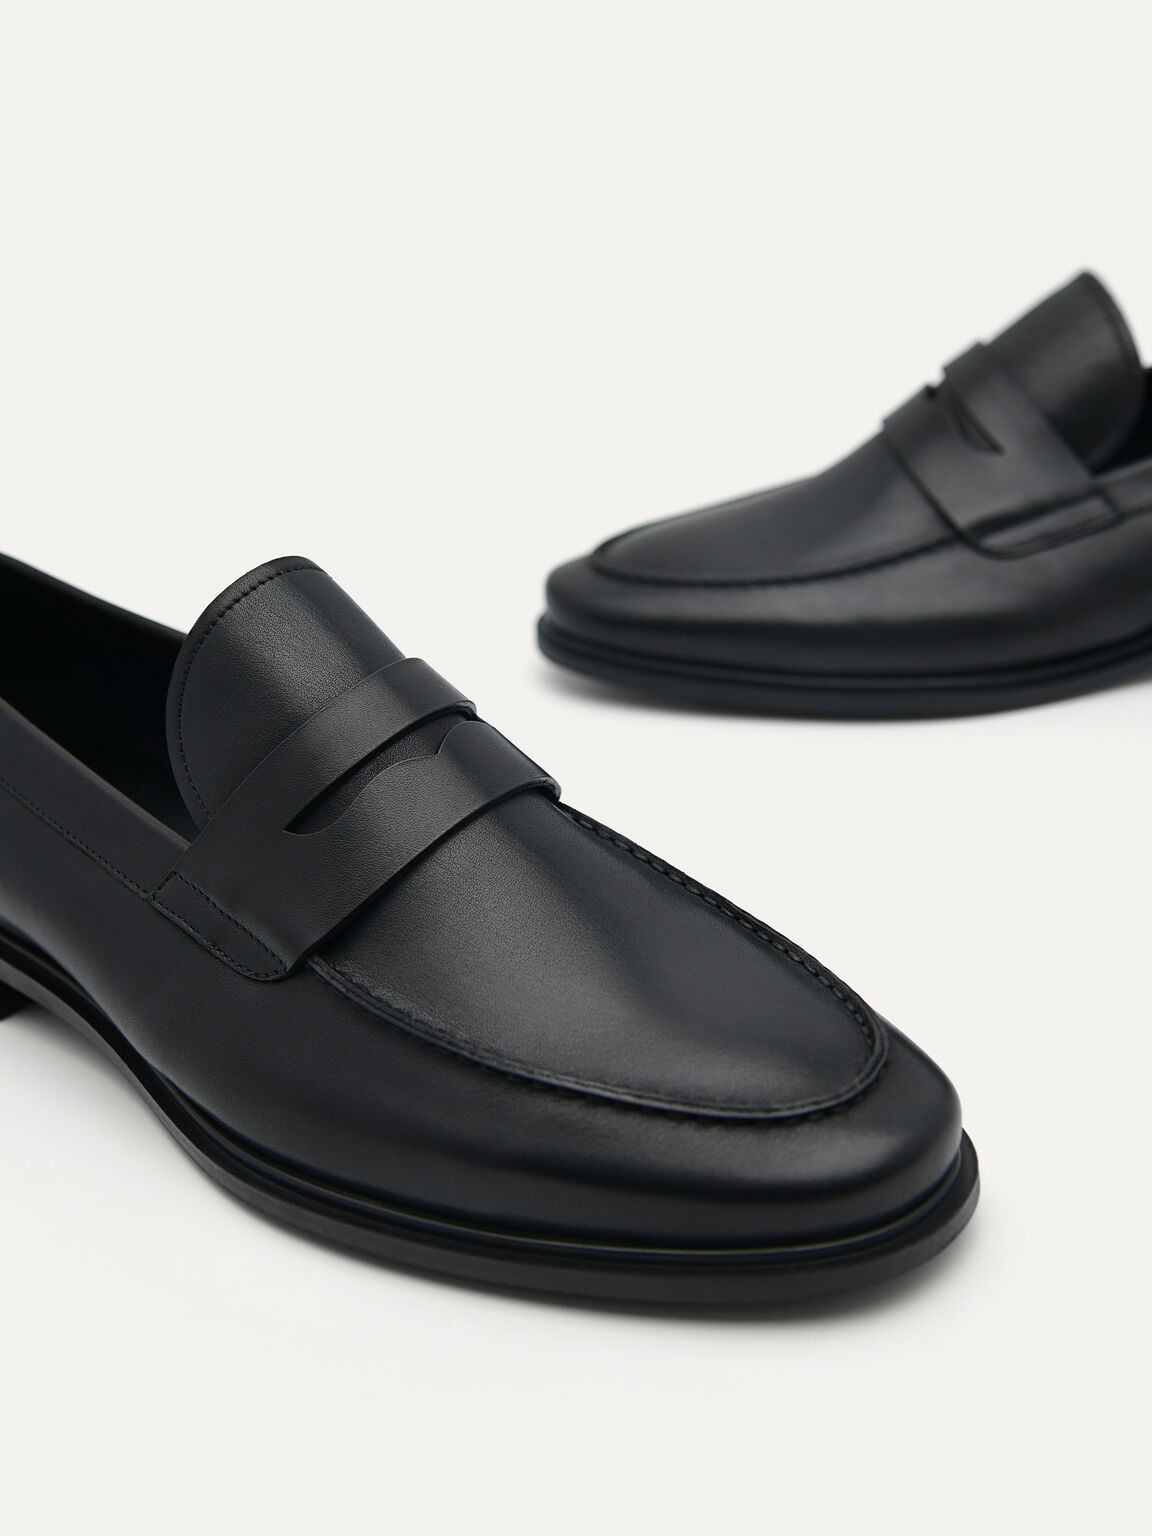 Bailey Calf Leather Loafers, Black, hi-res